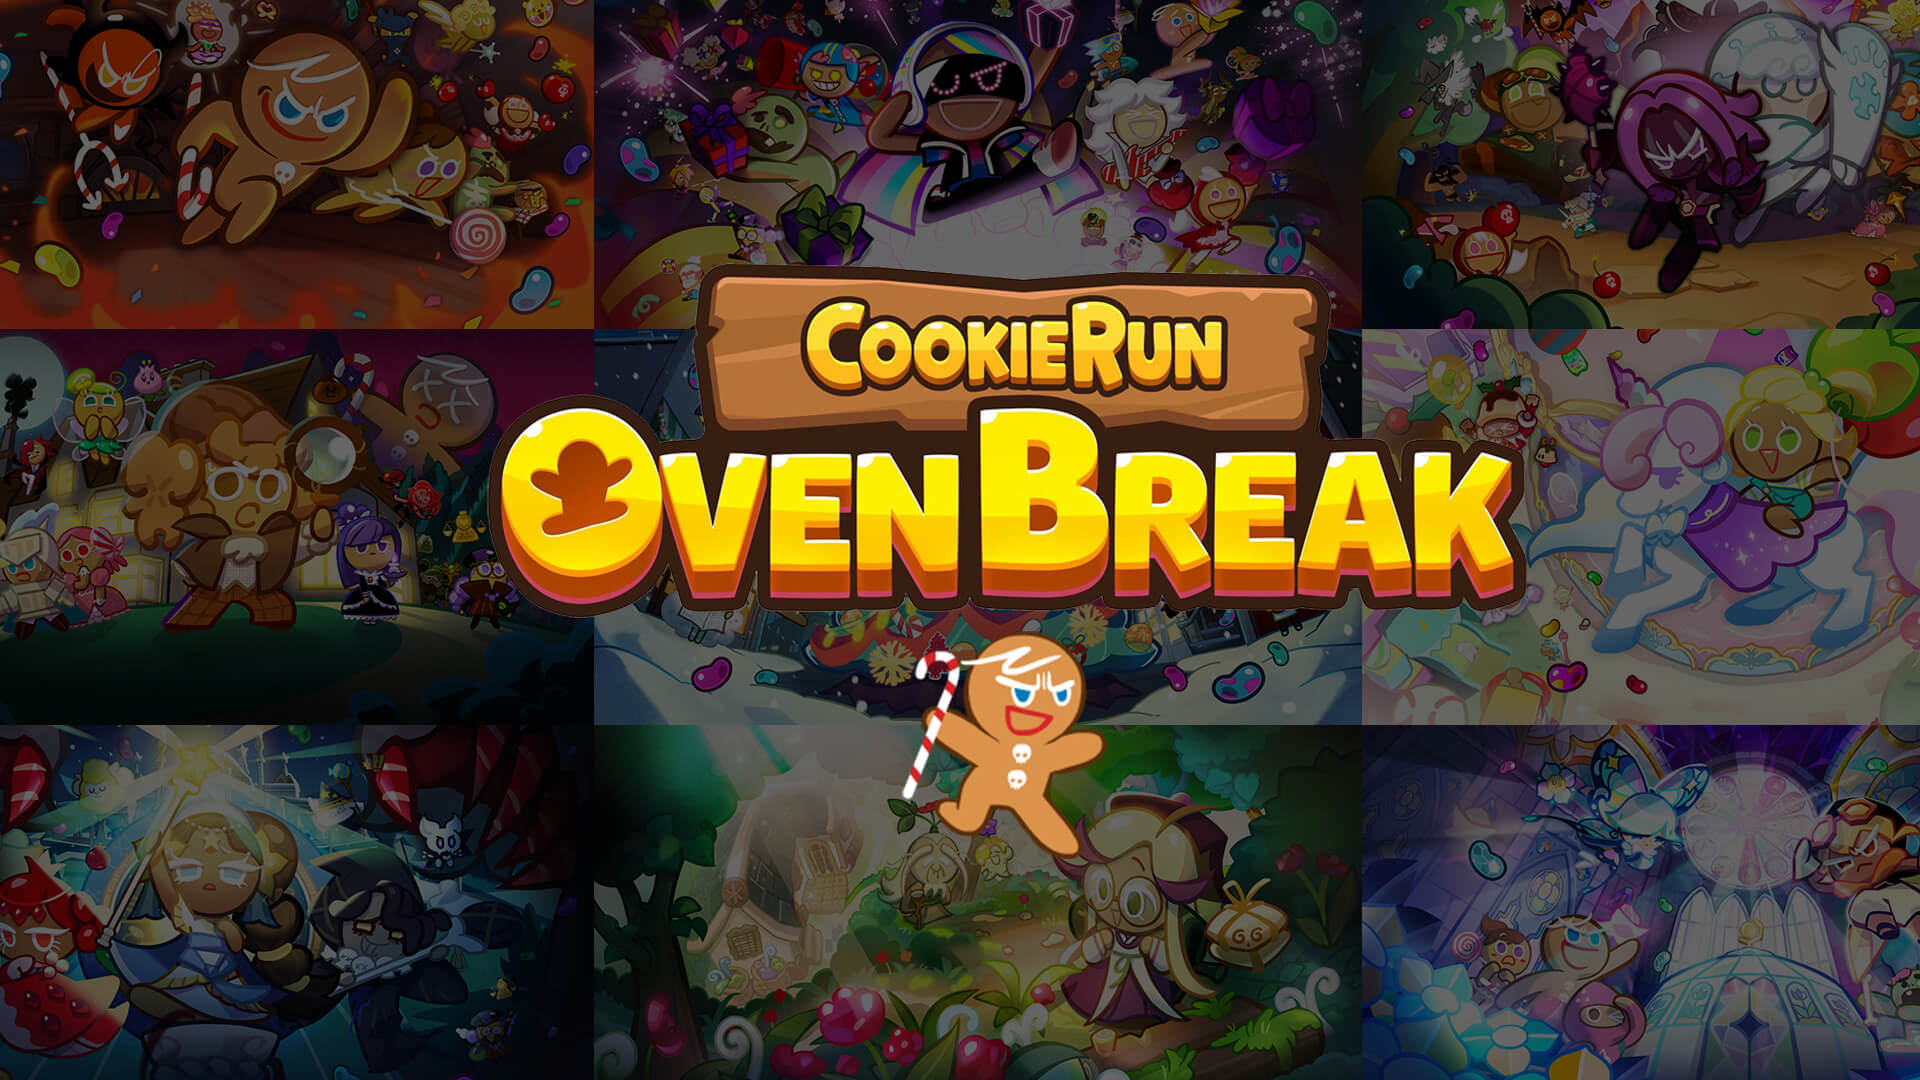 Cookie Run NFT (November 2021) Know The Complete Details!